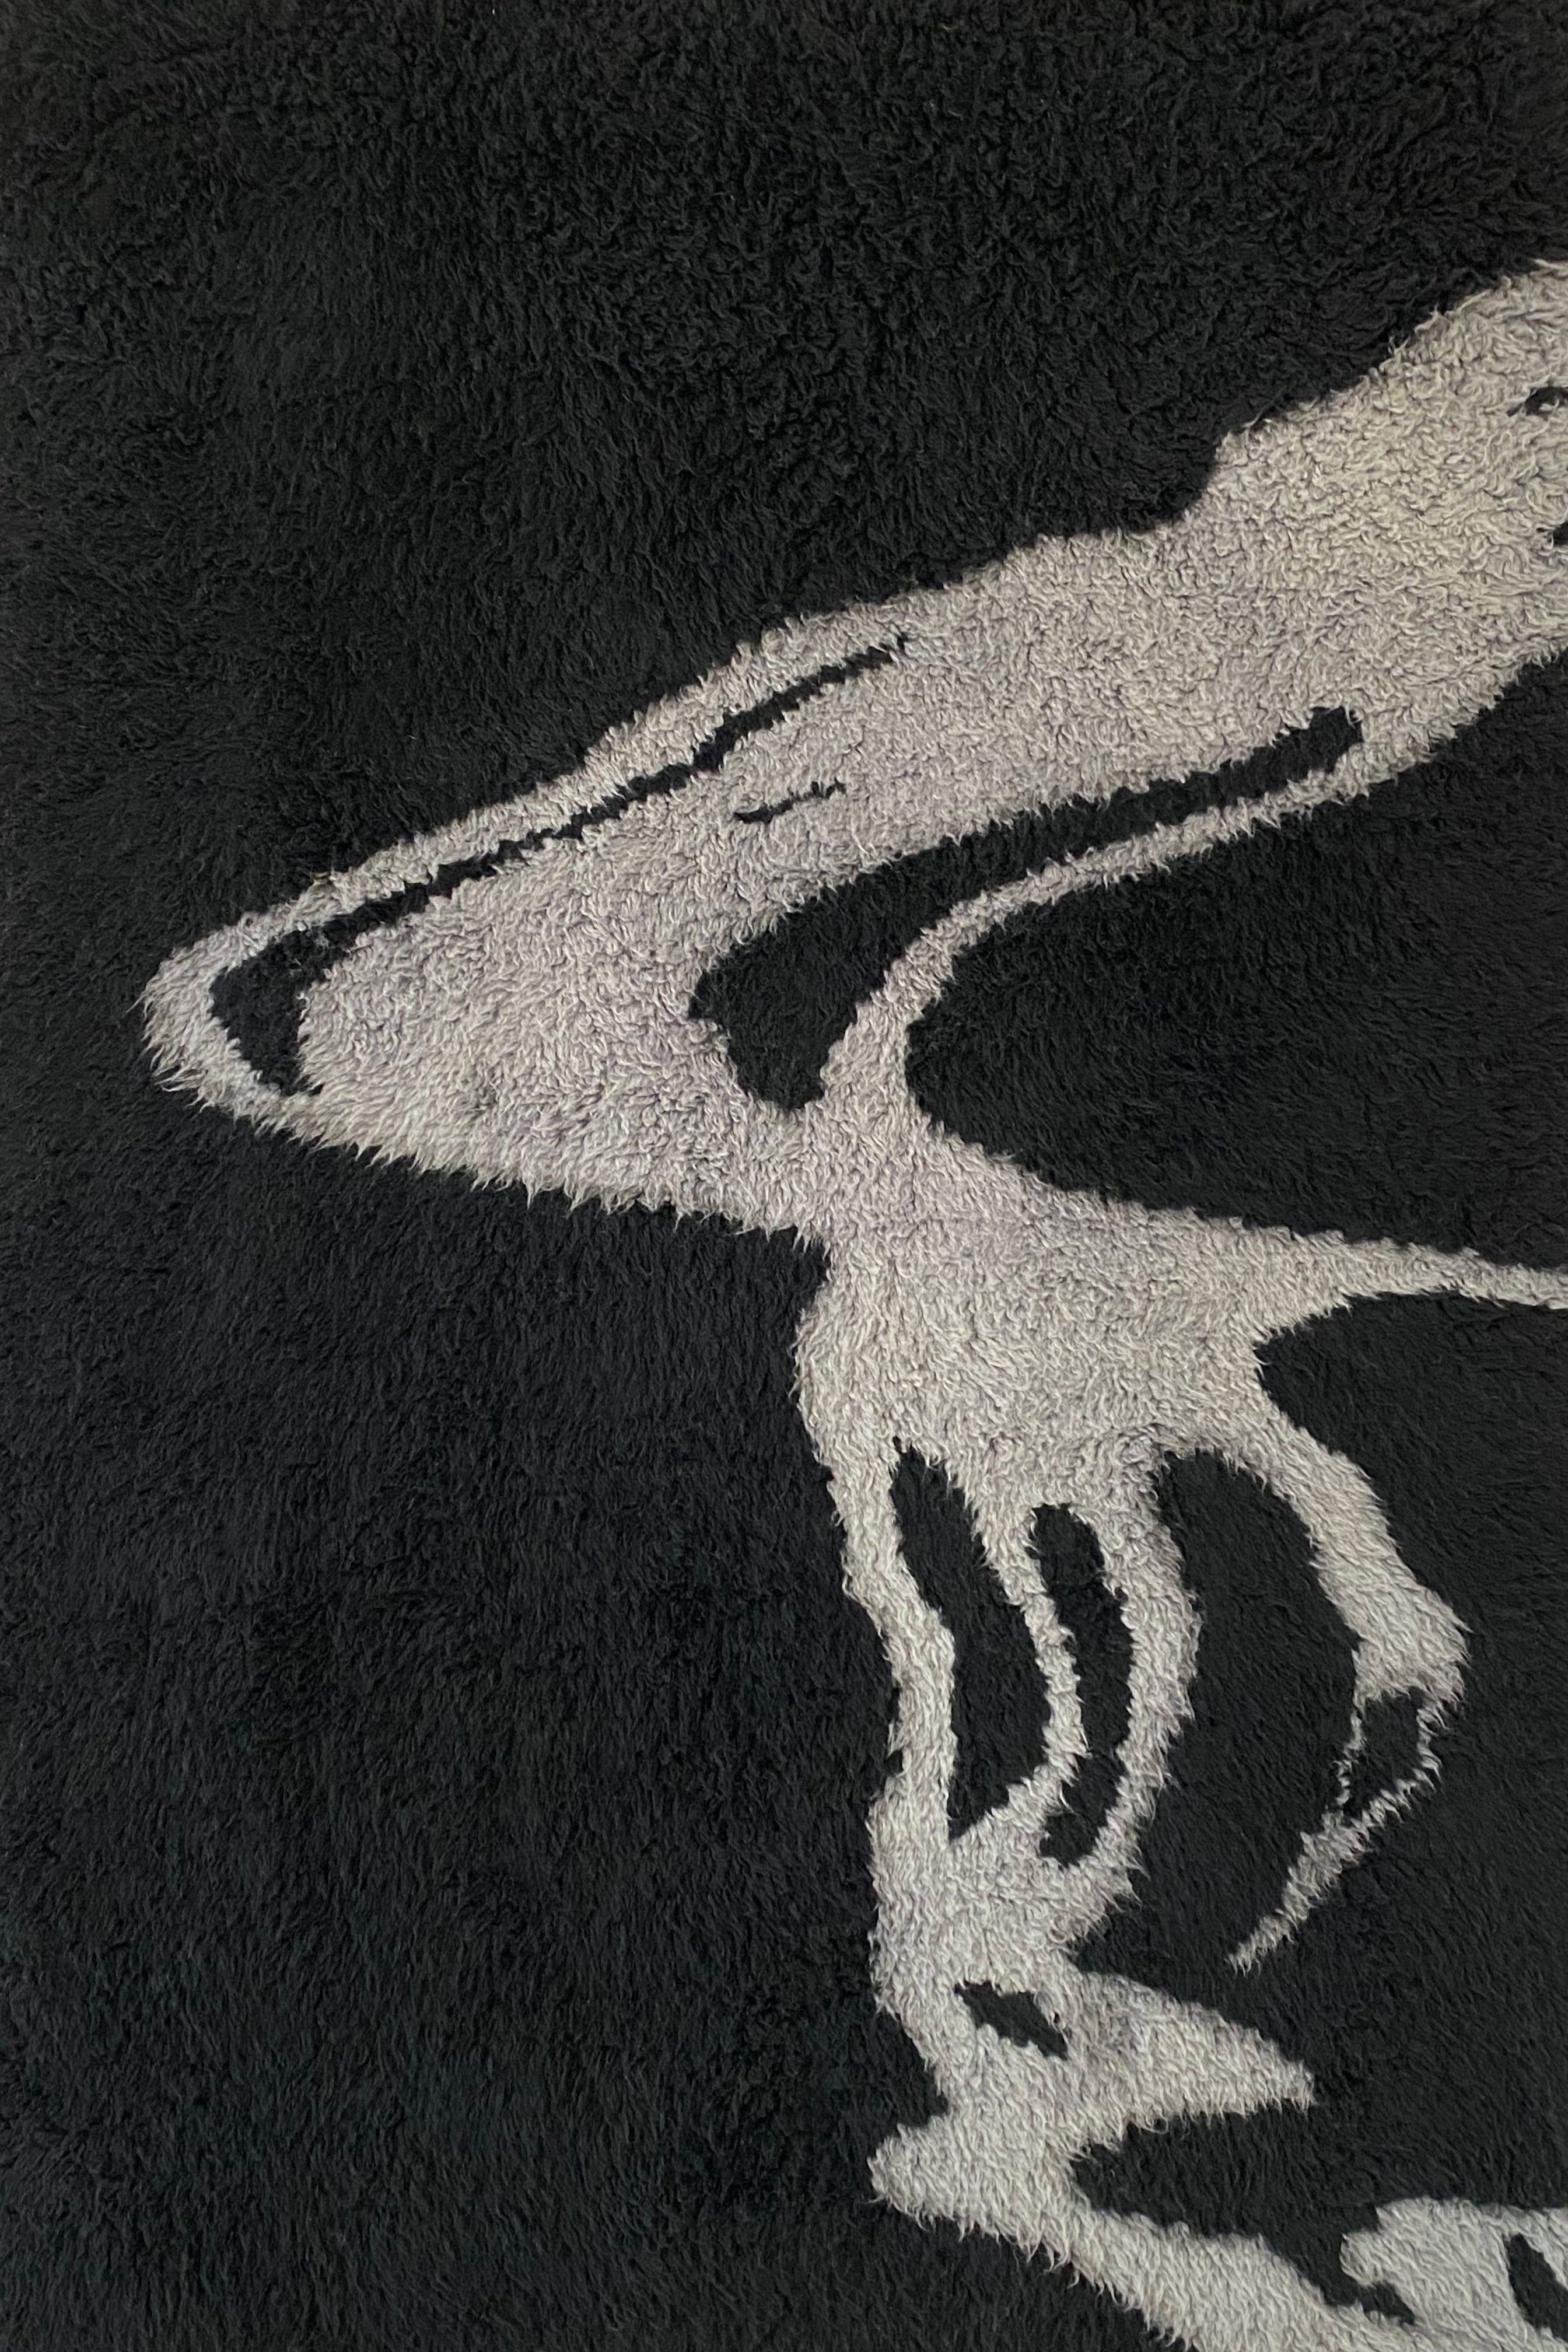 Off Axis, a sustainable handmade artist rug made of 100% sheep wool, part of the Zakaria Rugs in-house collection